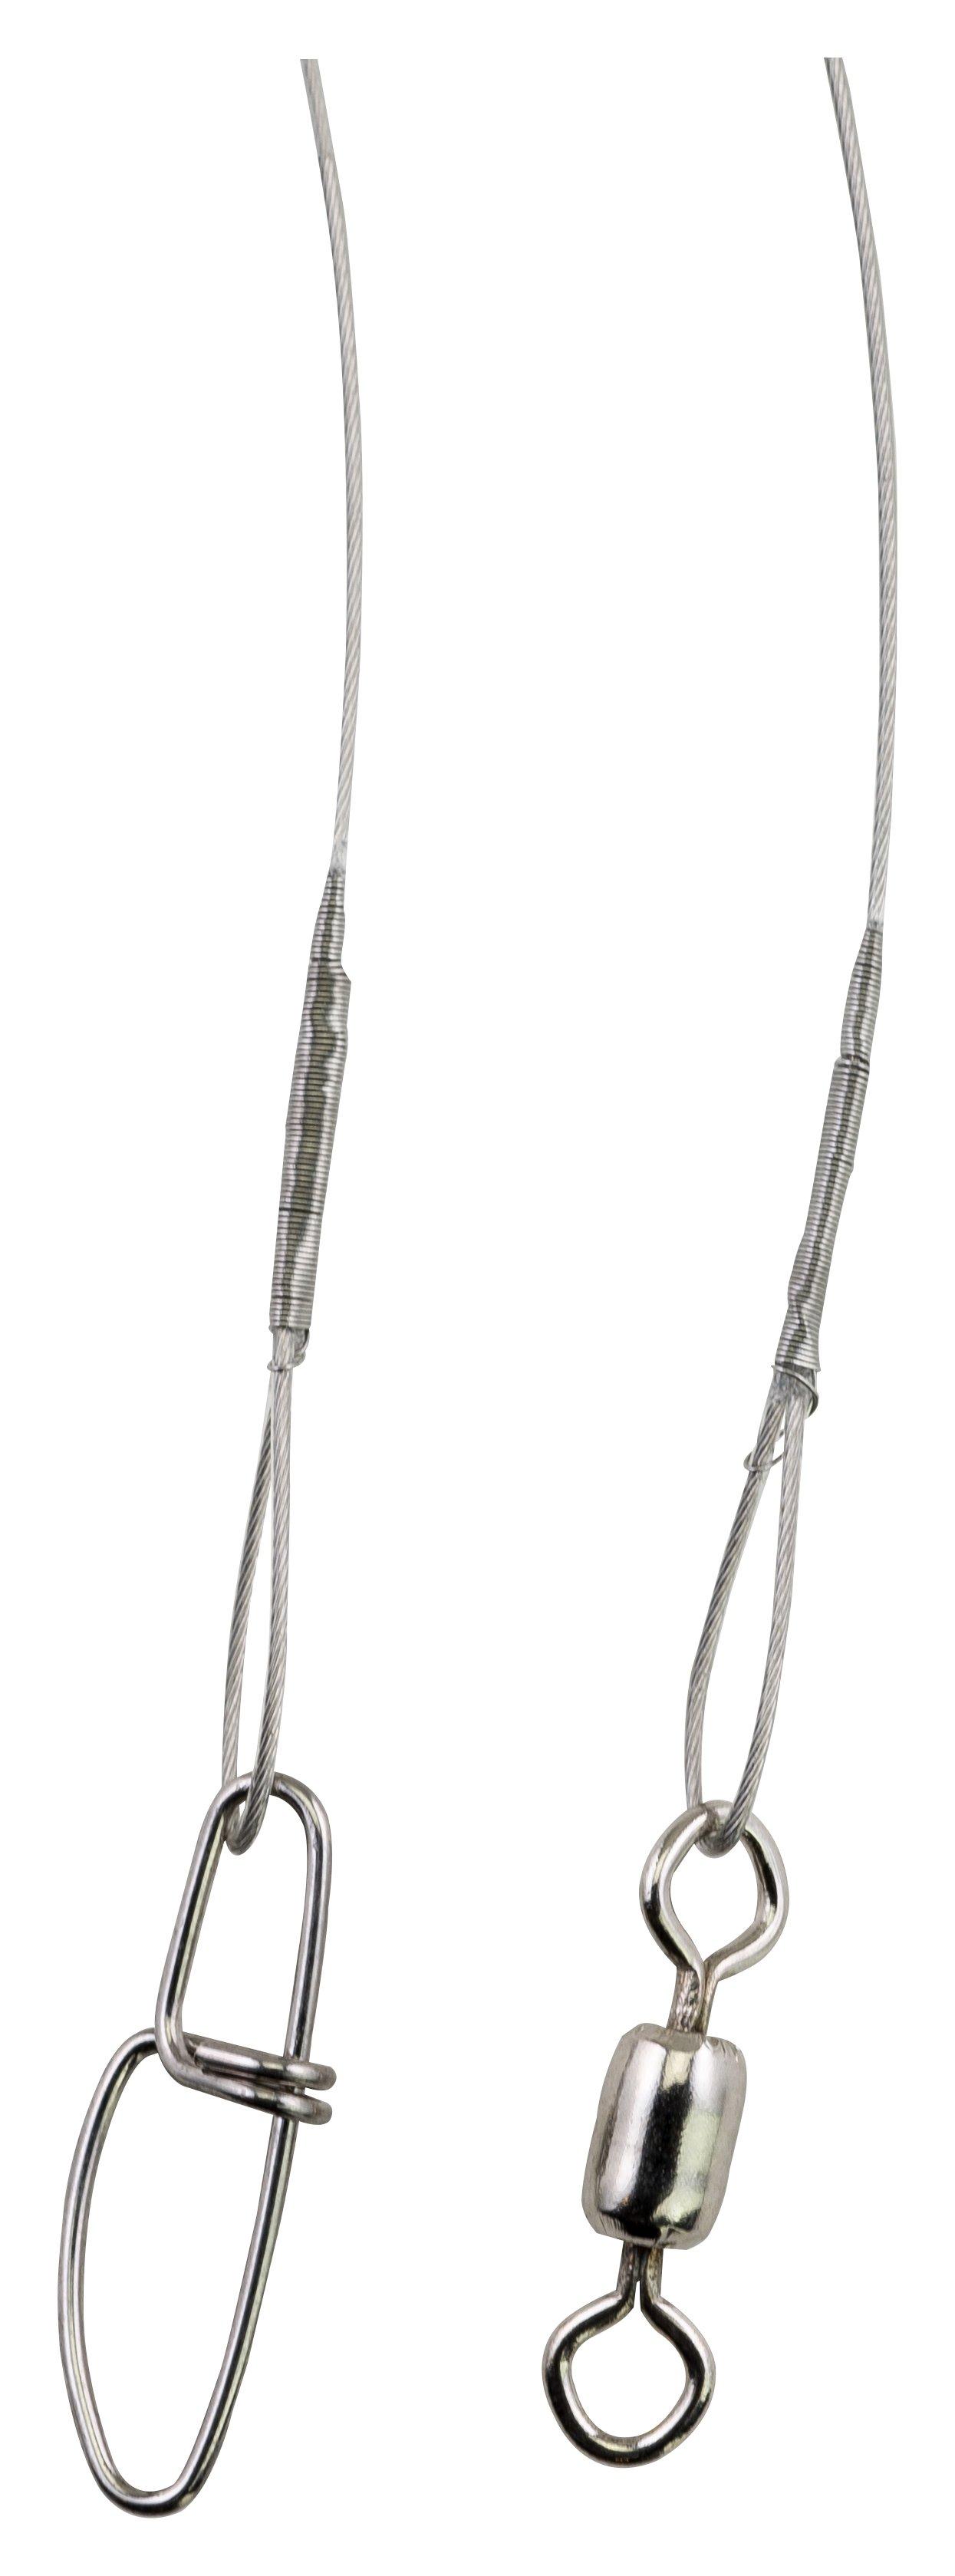 Berkley Wire-Wound Steelon Leaders  Up to 33% Off Free Shipping over $49!